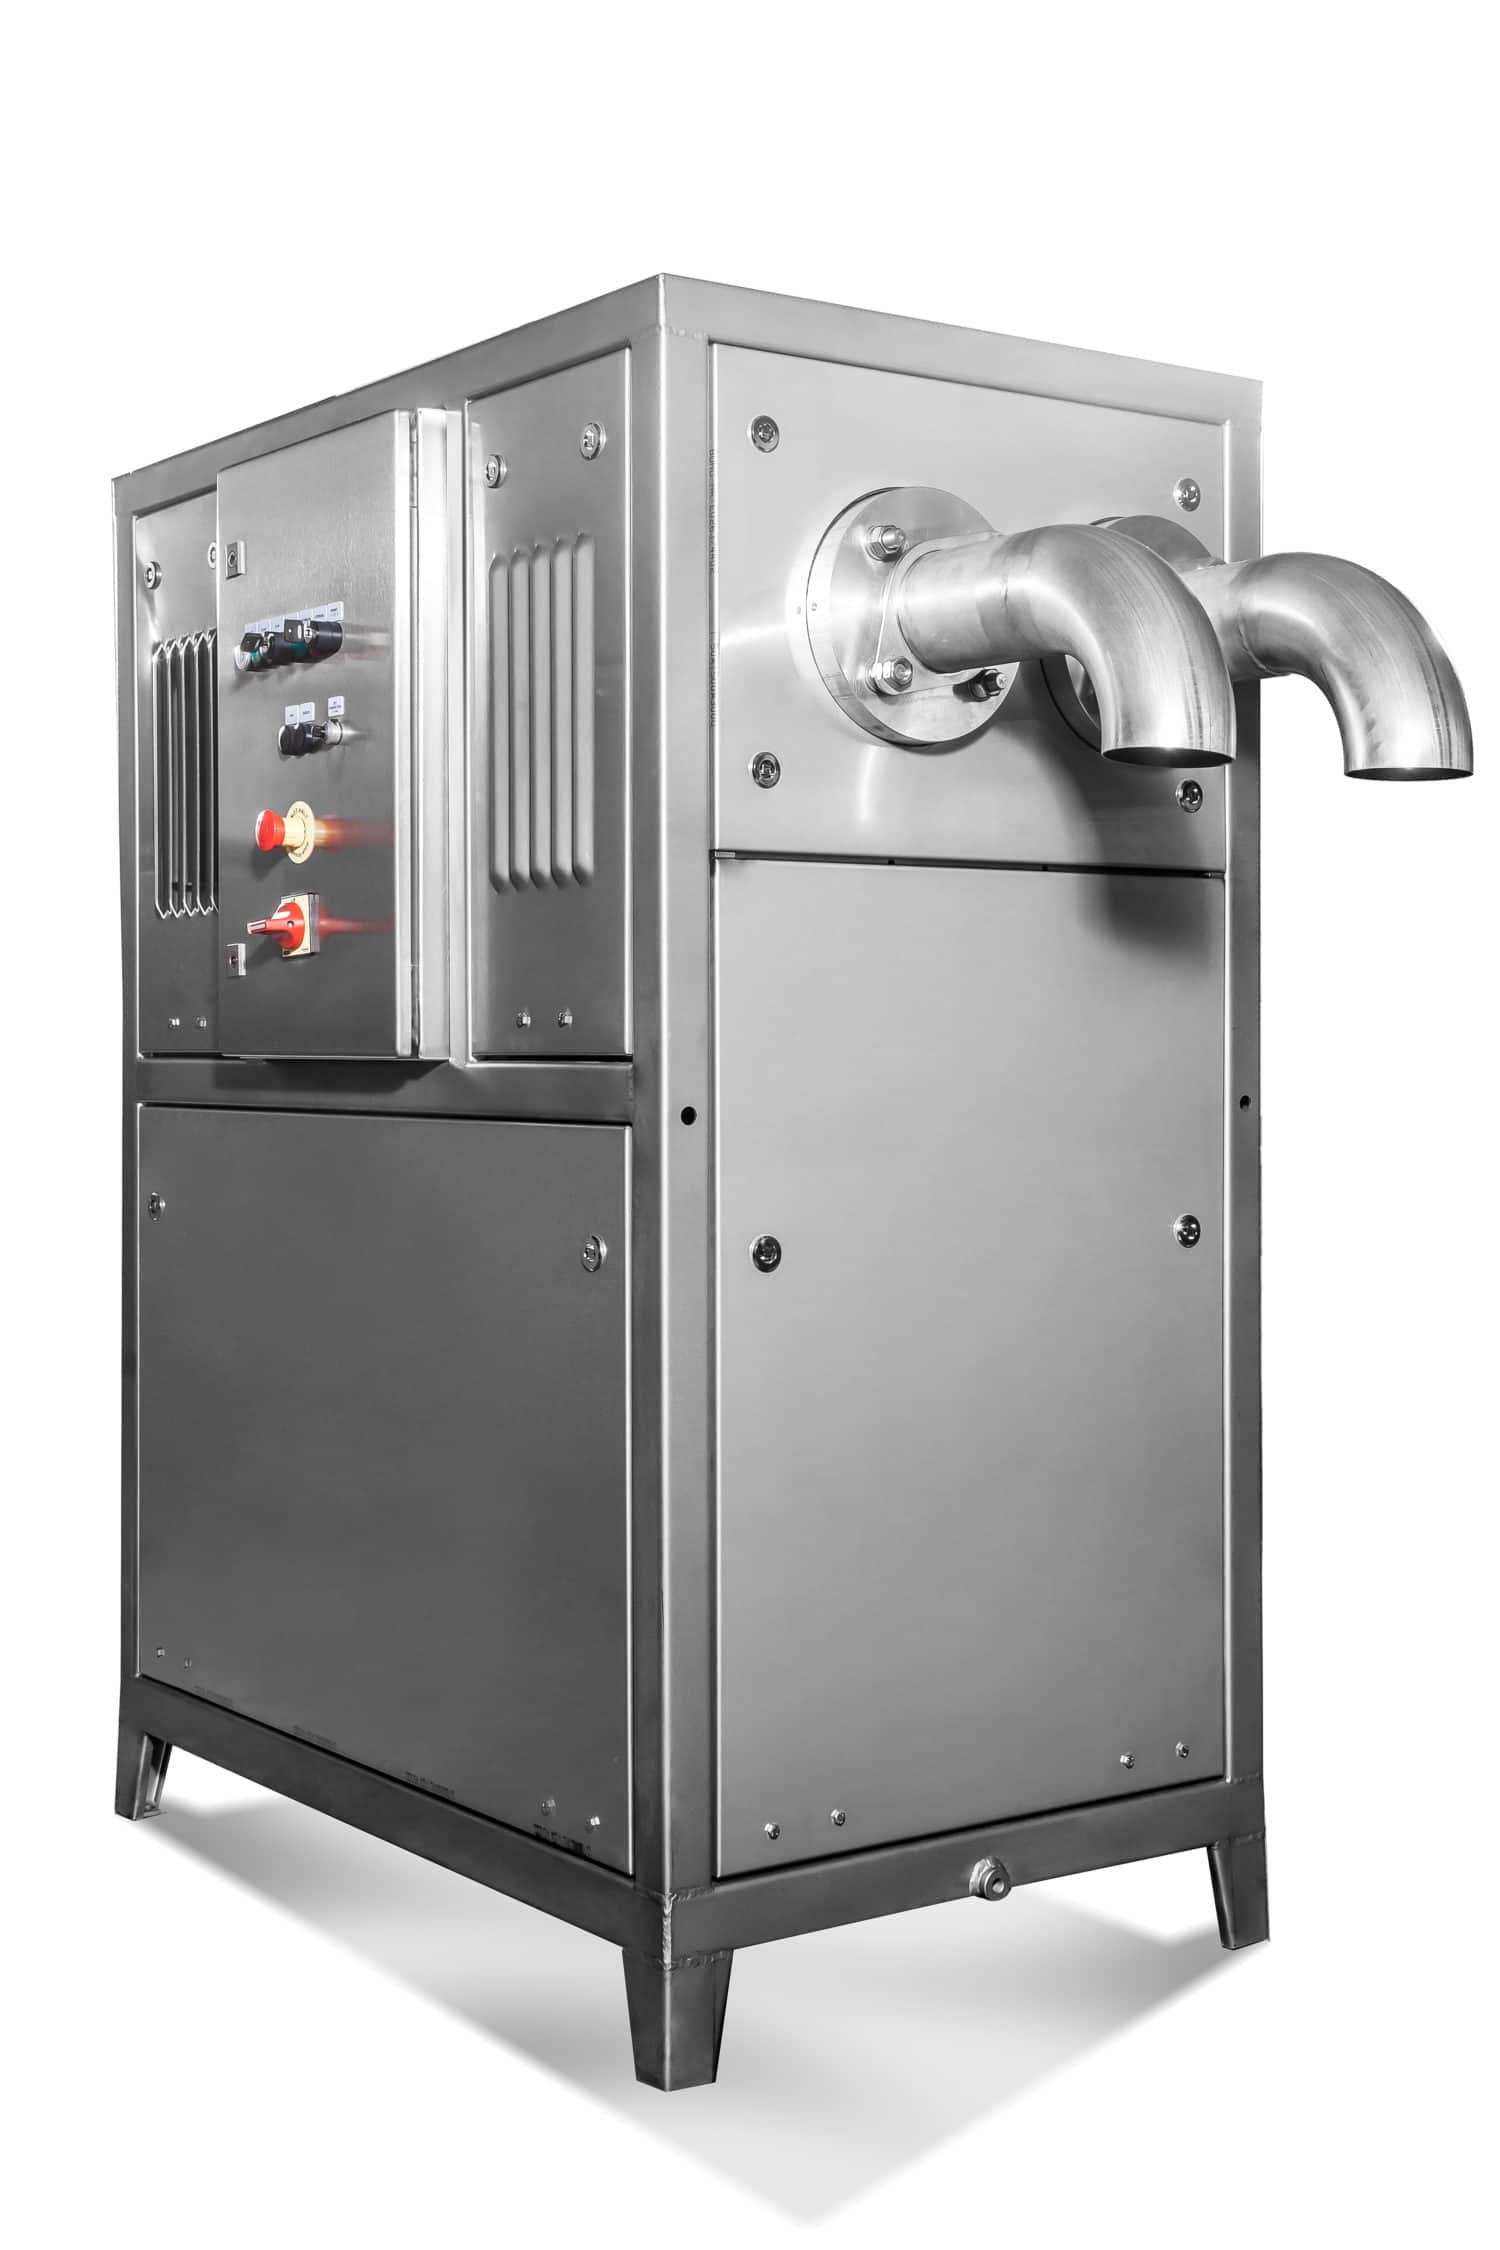 Double pelletiser for the production of dry ice